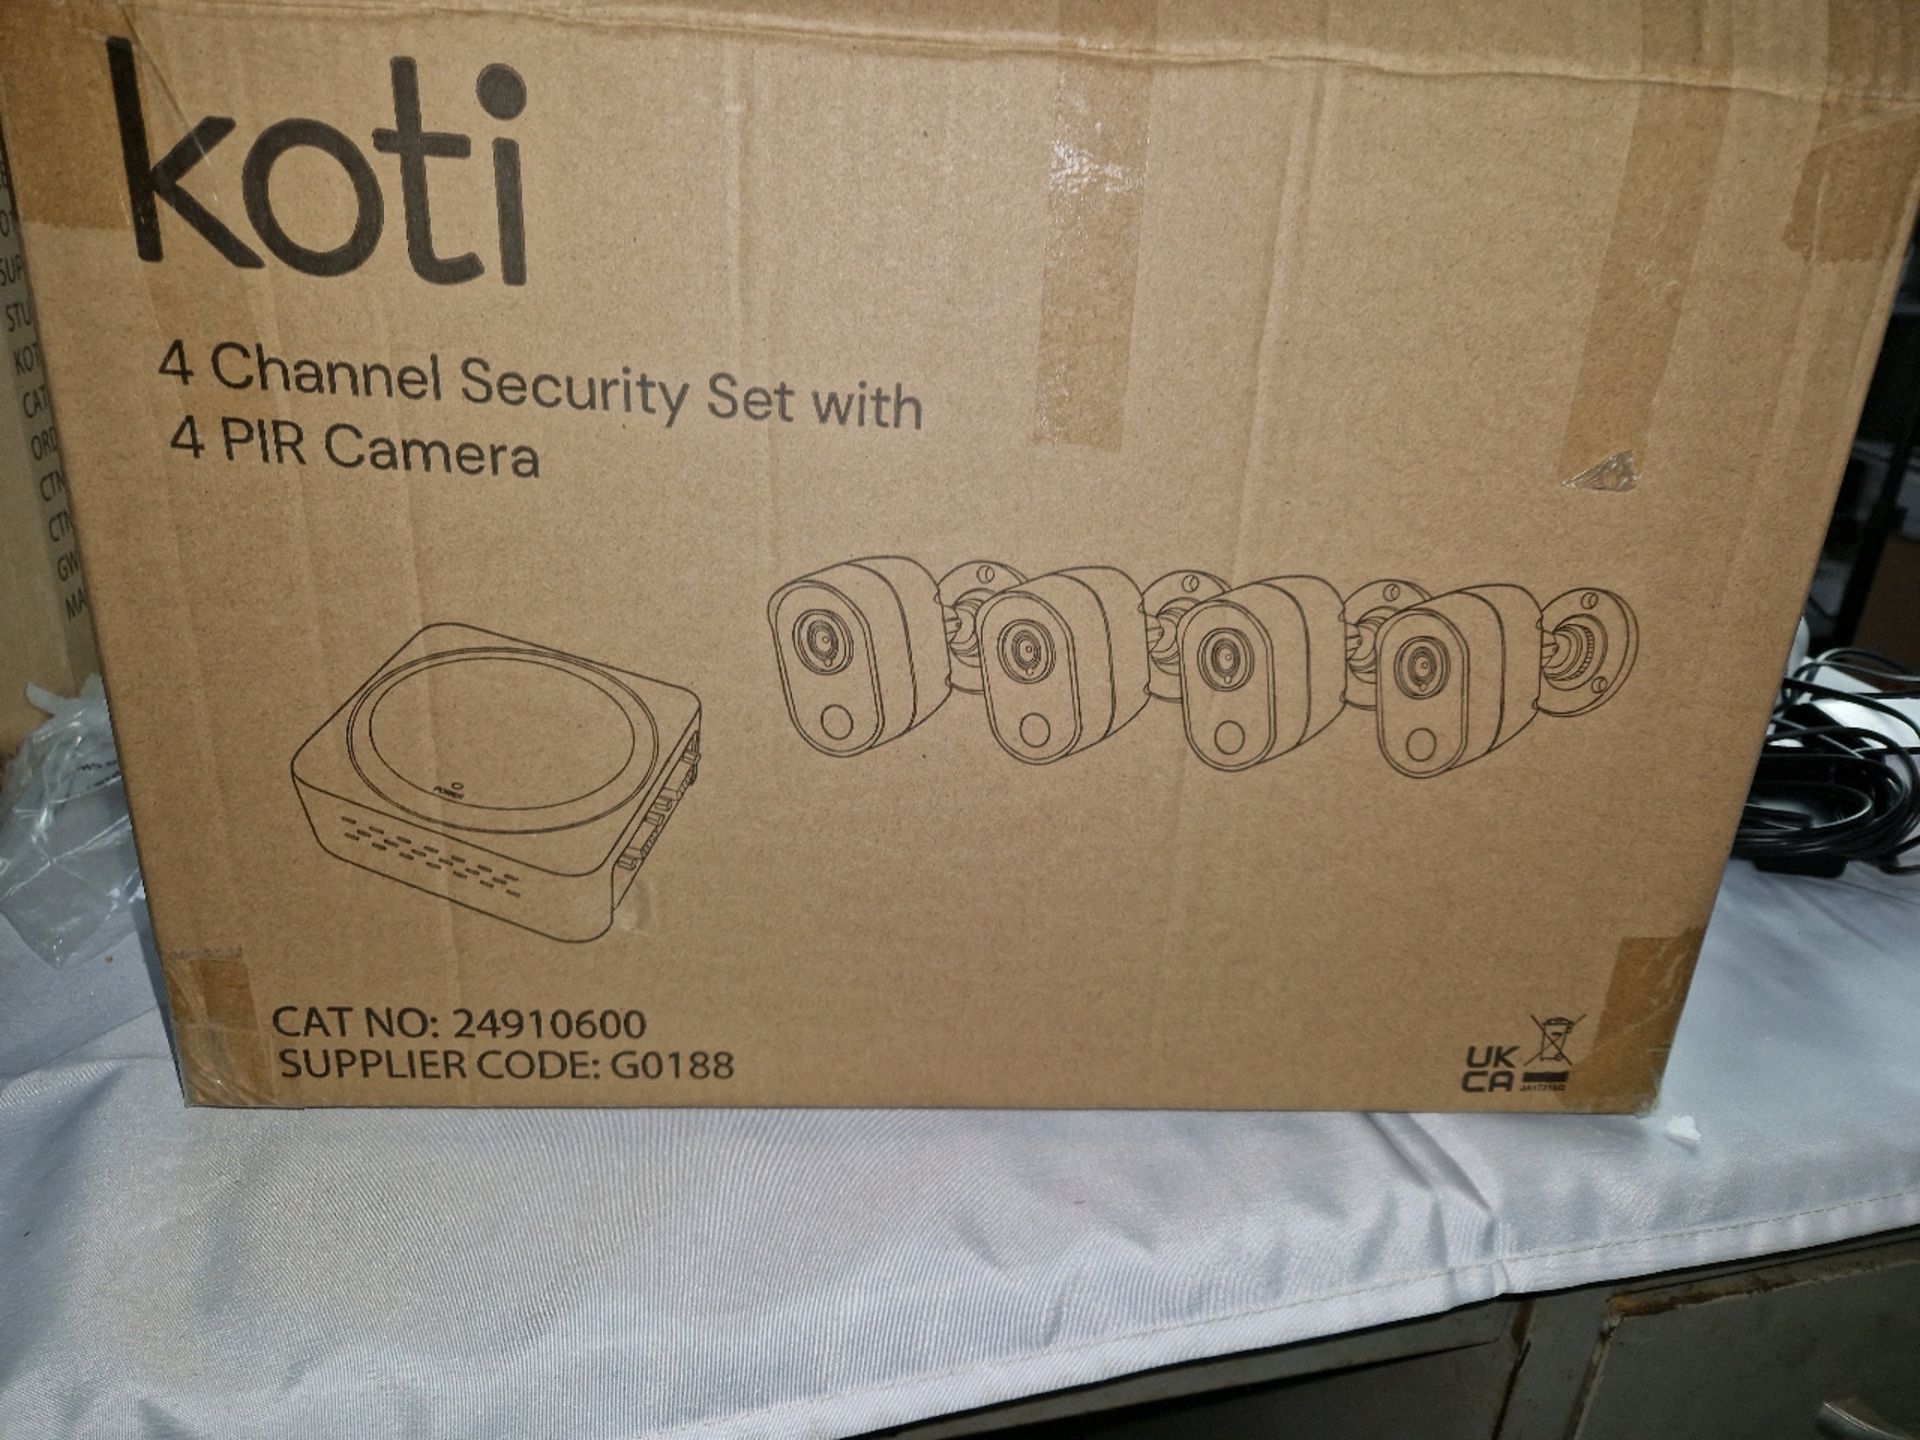 KOTI 4CHANNEL SECURITY SET WITH 4 PIR CAMERA - Image 3 of 3